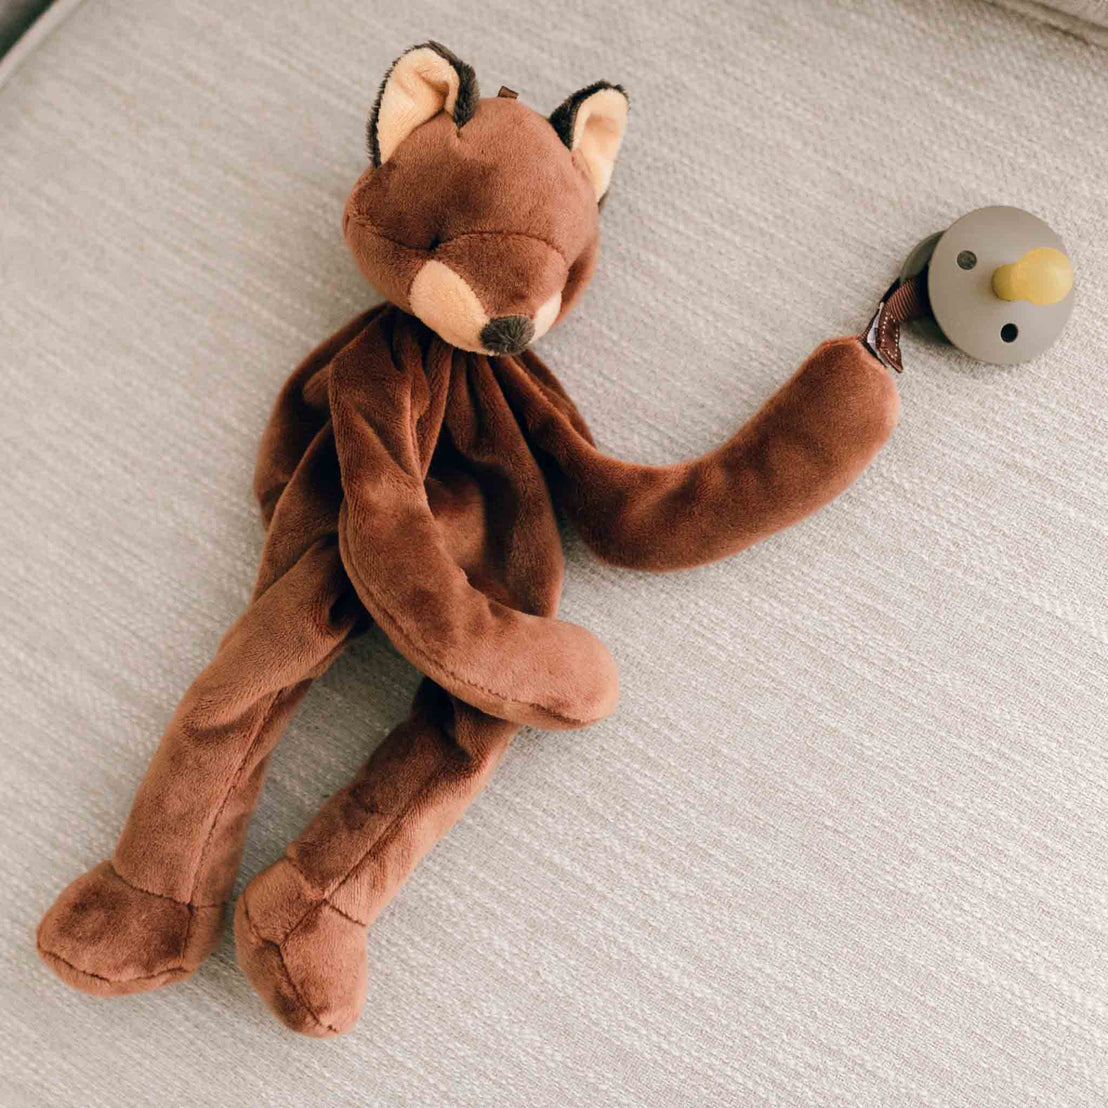 A Silly Fox Buddy pacifier holder with a rattle attached to its tail, lying on an upscale light grey fabric. The heirloom-quality toy is soft brown, and the rattle is green and white. Suitable